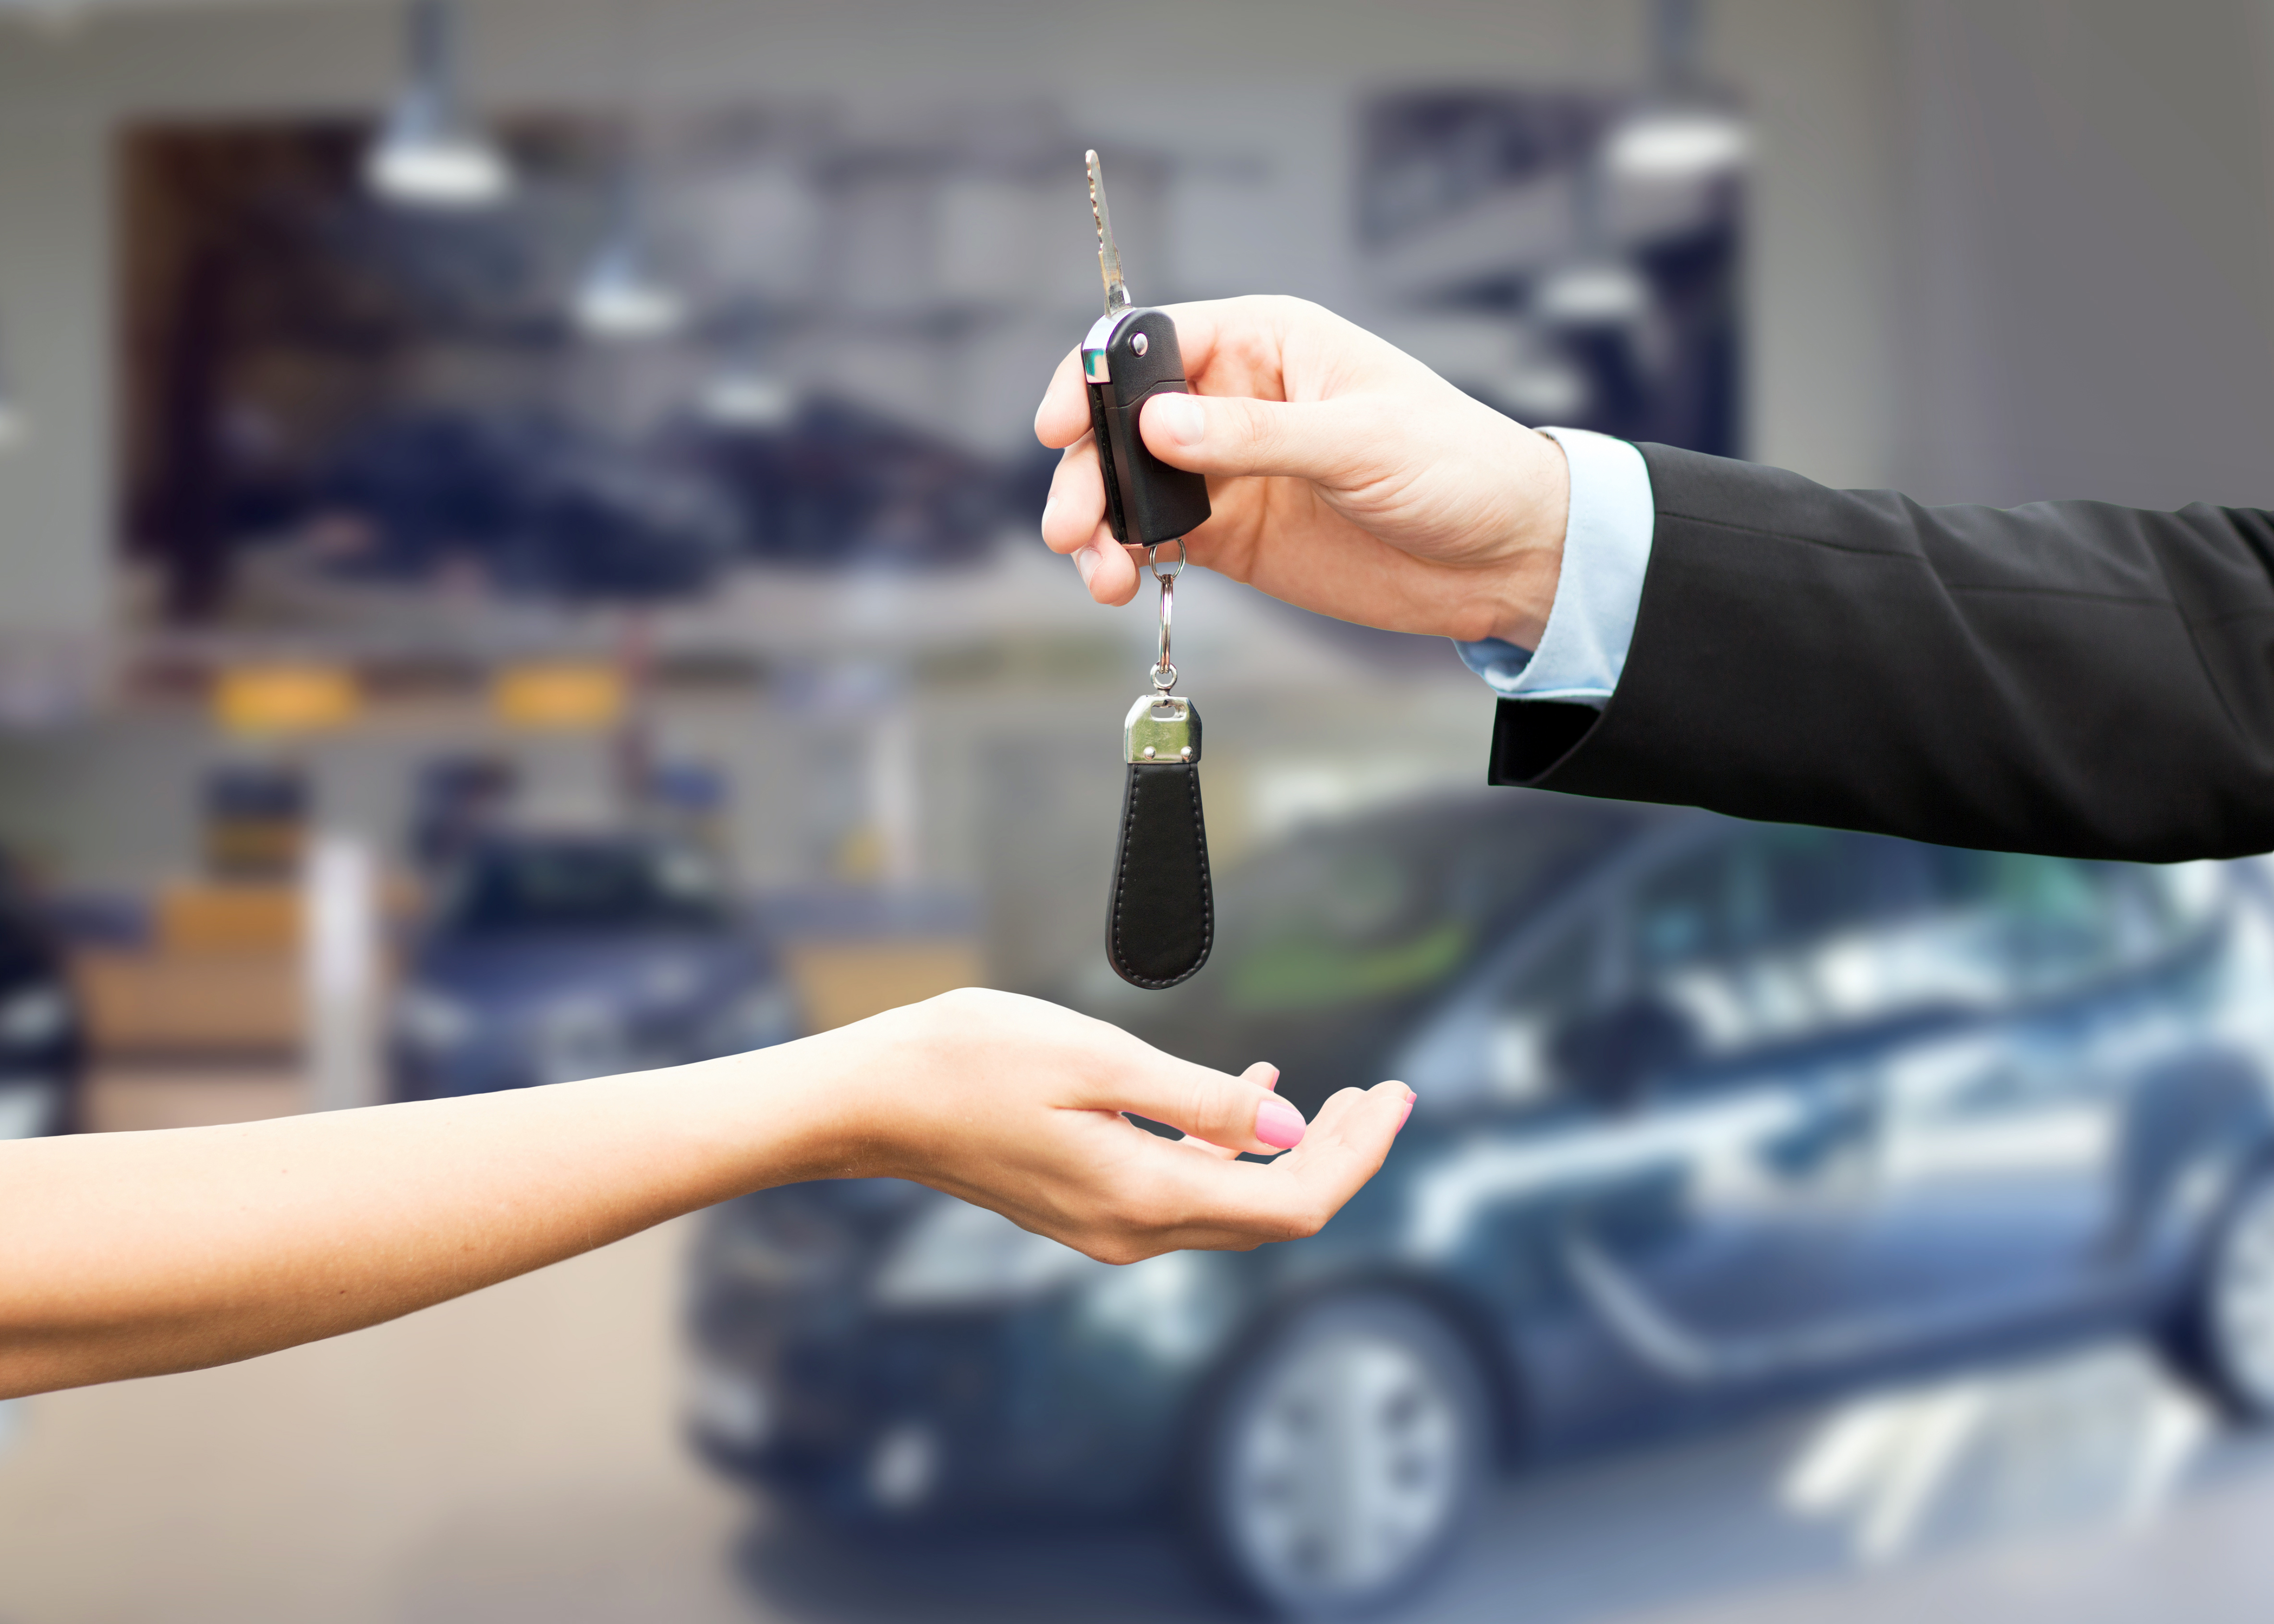 Preparing to Sell Your Car? Here's 4 Things You Should Do!